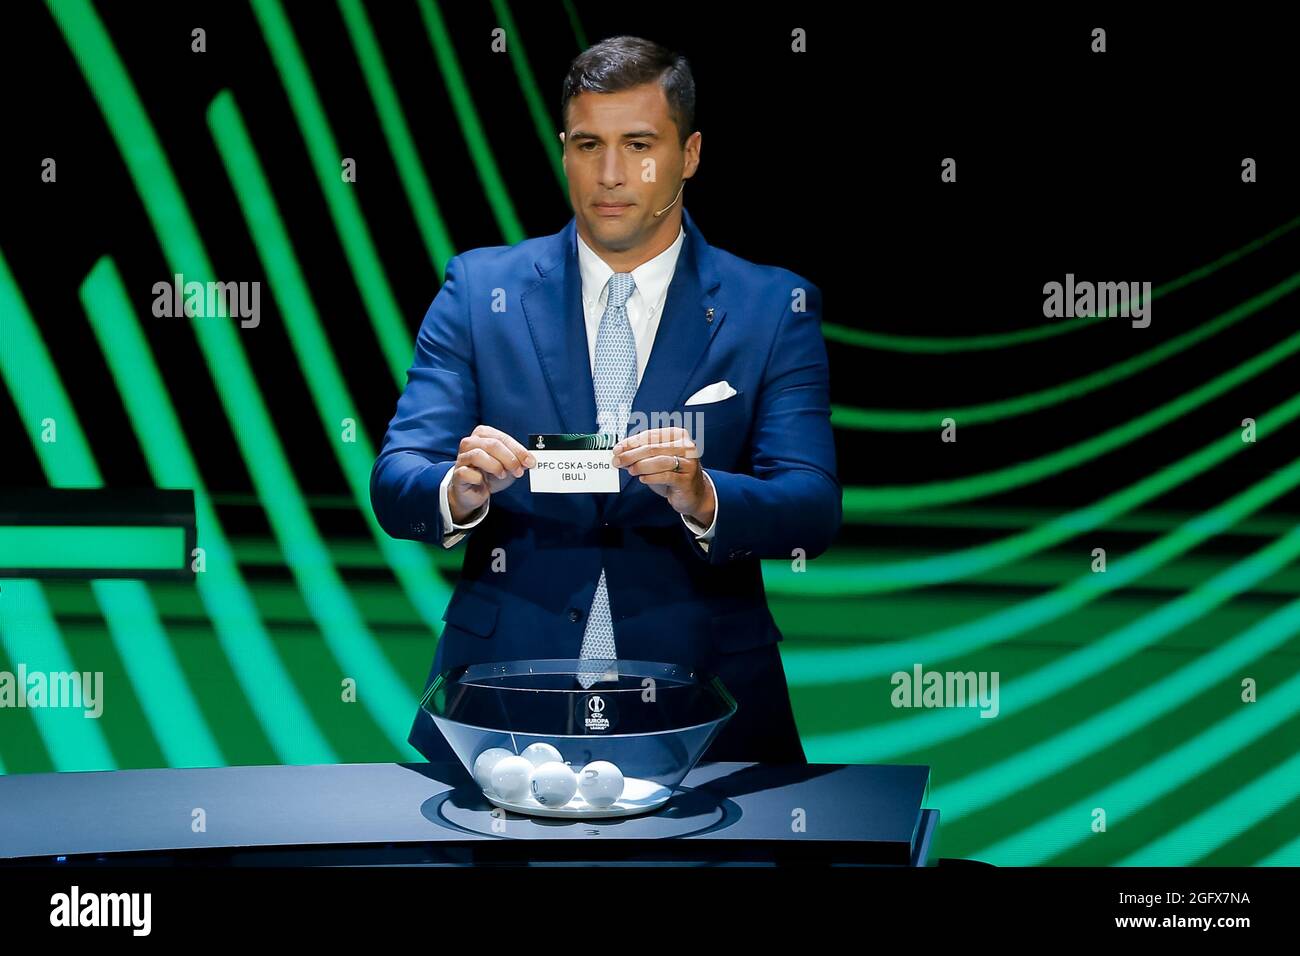 Istanbul, Turkey. 27th Aug, 2021. ISTANBUL, TURKEY - AUGUST 27: Former Player Lorik Cana draws out the card of PFC CSKA-Sofia during the UEFA Conference League 2021/22 Group Stage Draw at the Halic Congress Center on August 27, 2021 in Istanbul, Turkey. (Photo by Orange Pictures) Credit: Orange Pics BV/Alamy Live News Stock Photo